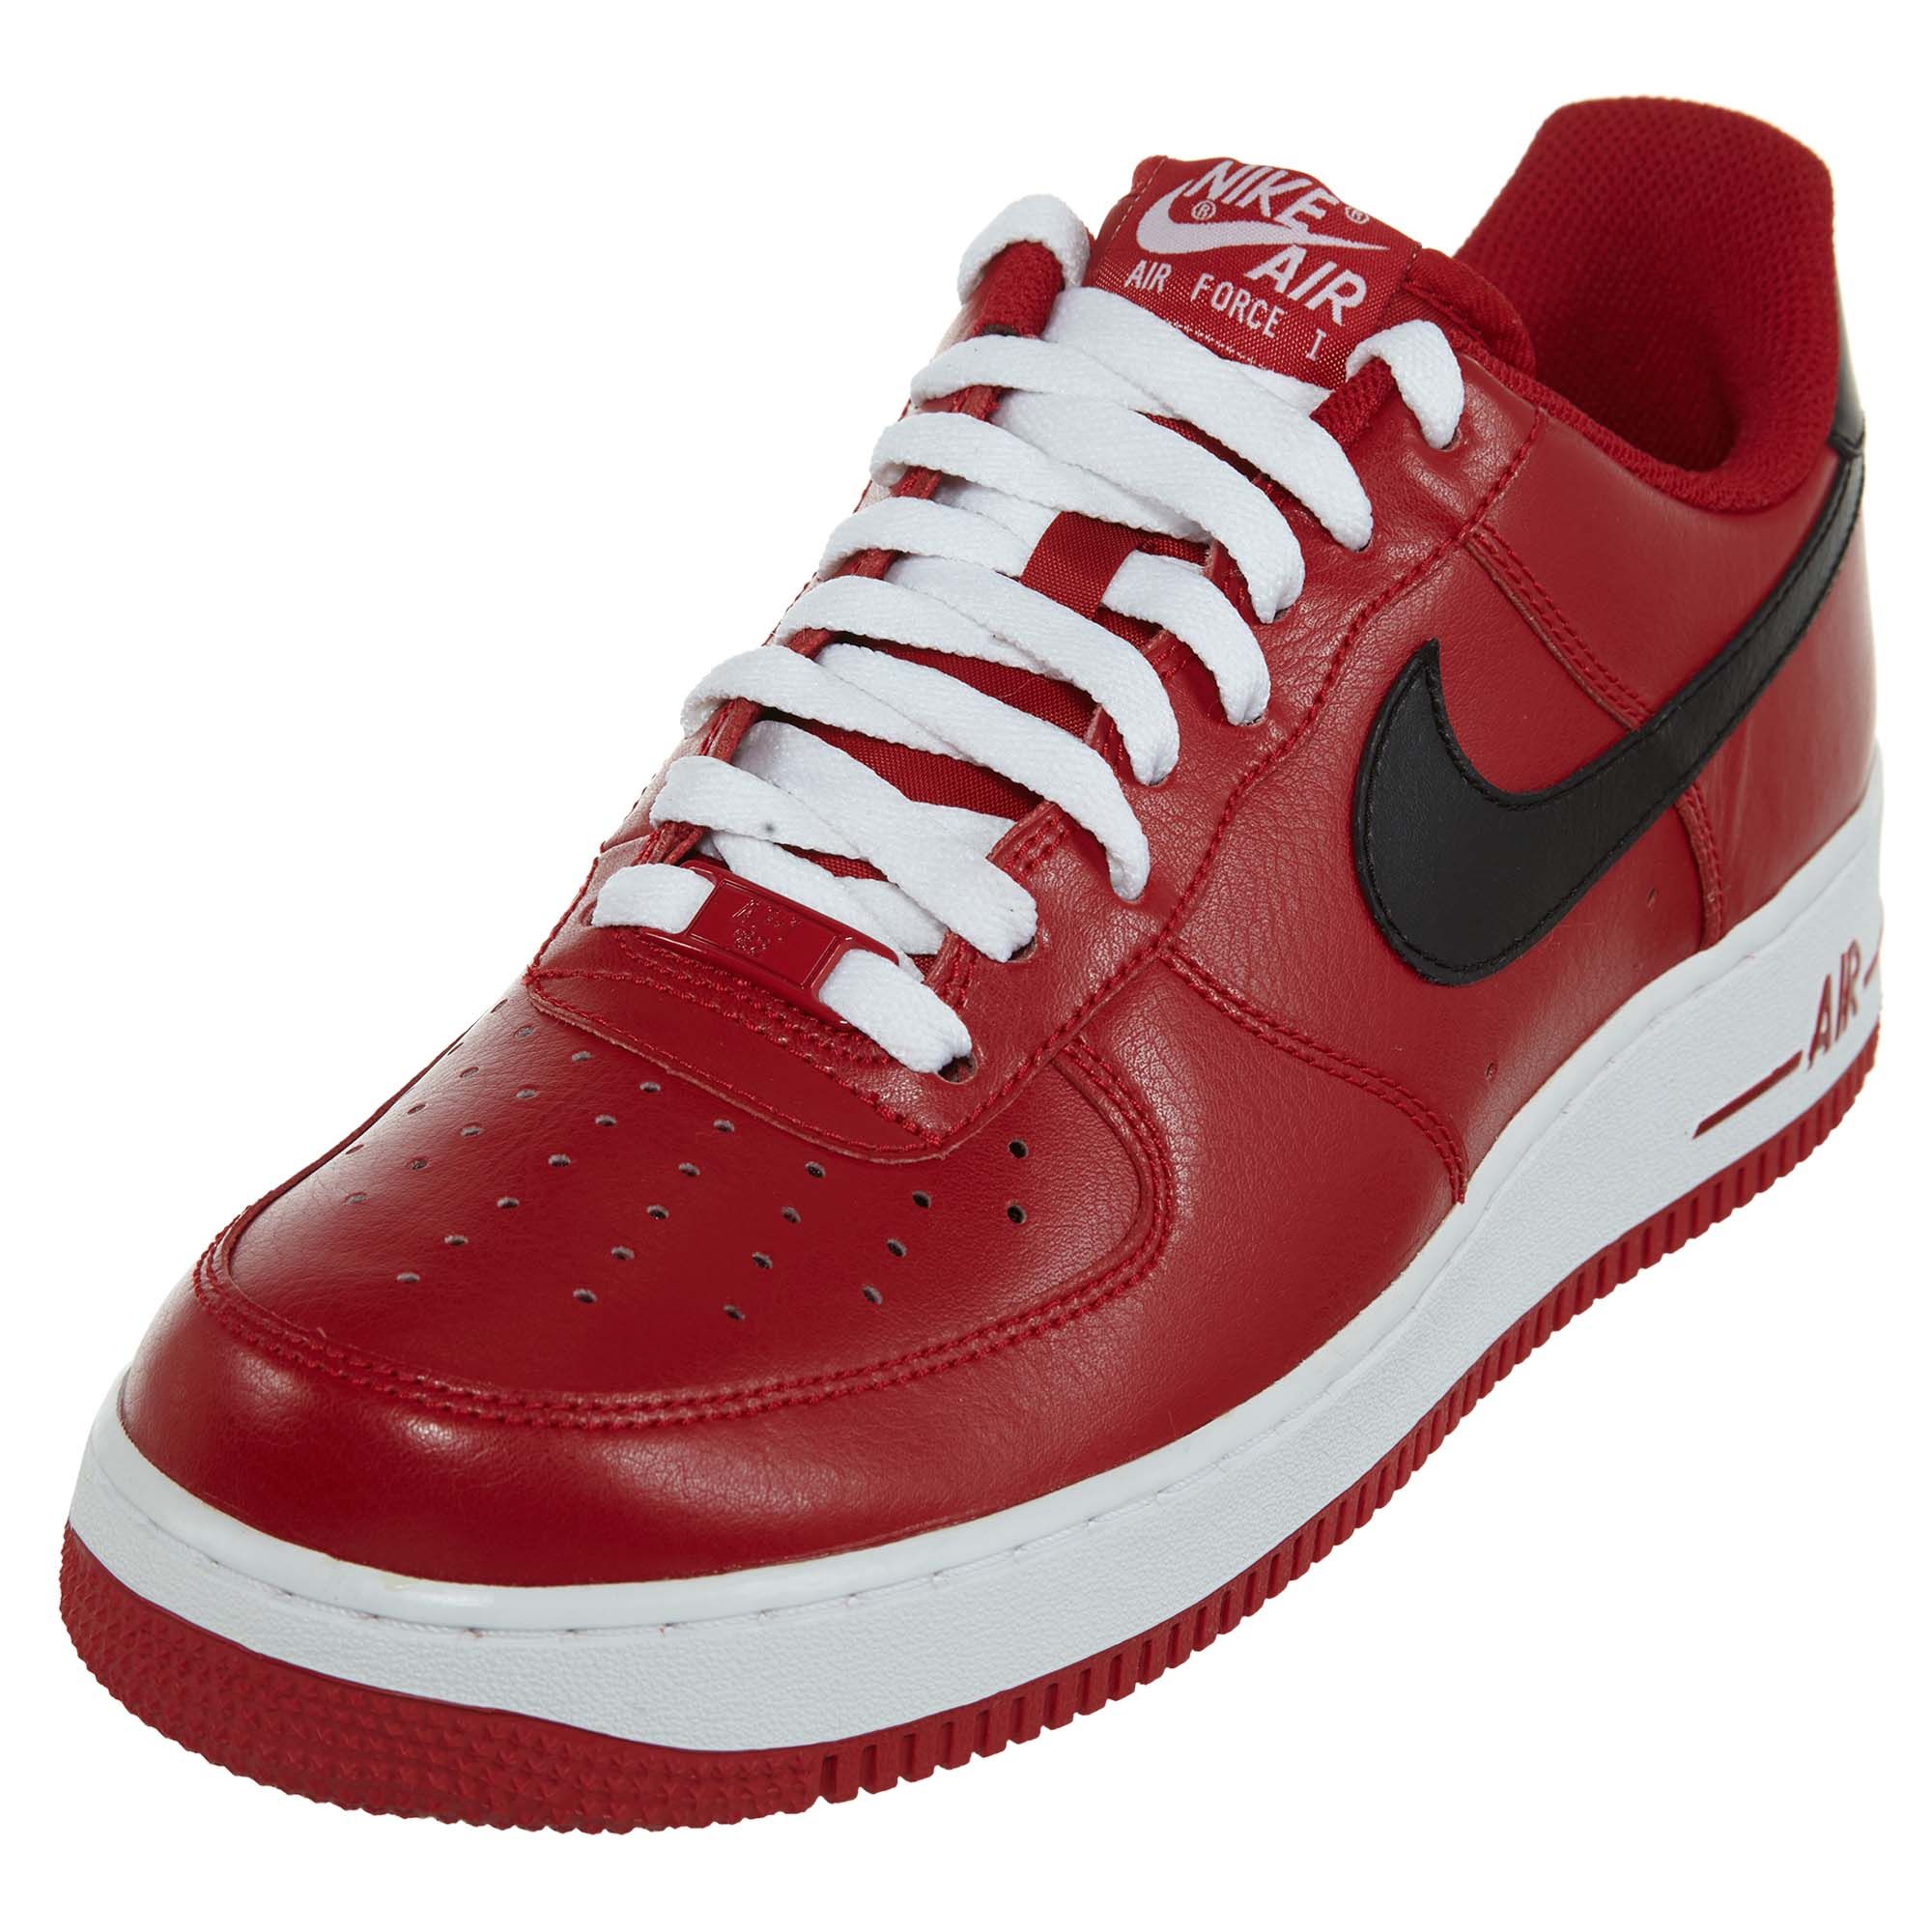 Nike Air Force 1 '07 Womens Style 